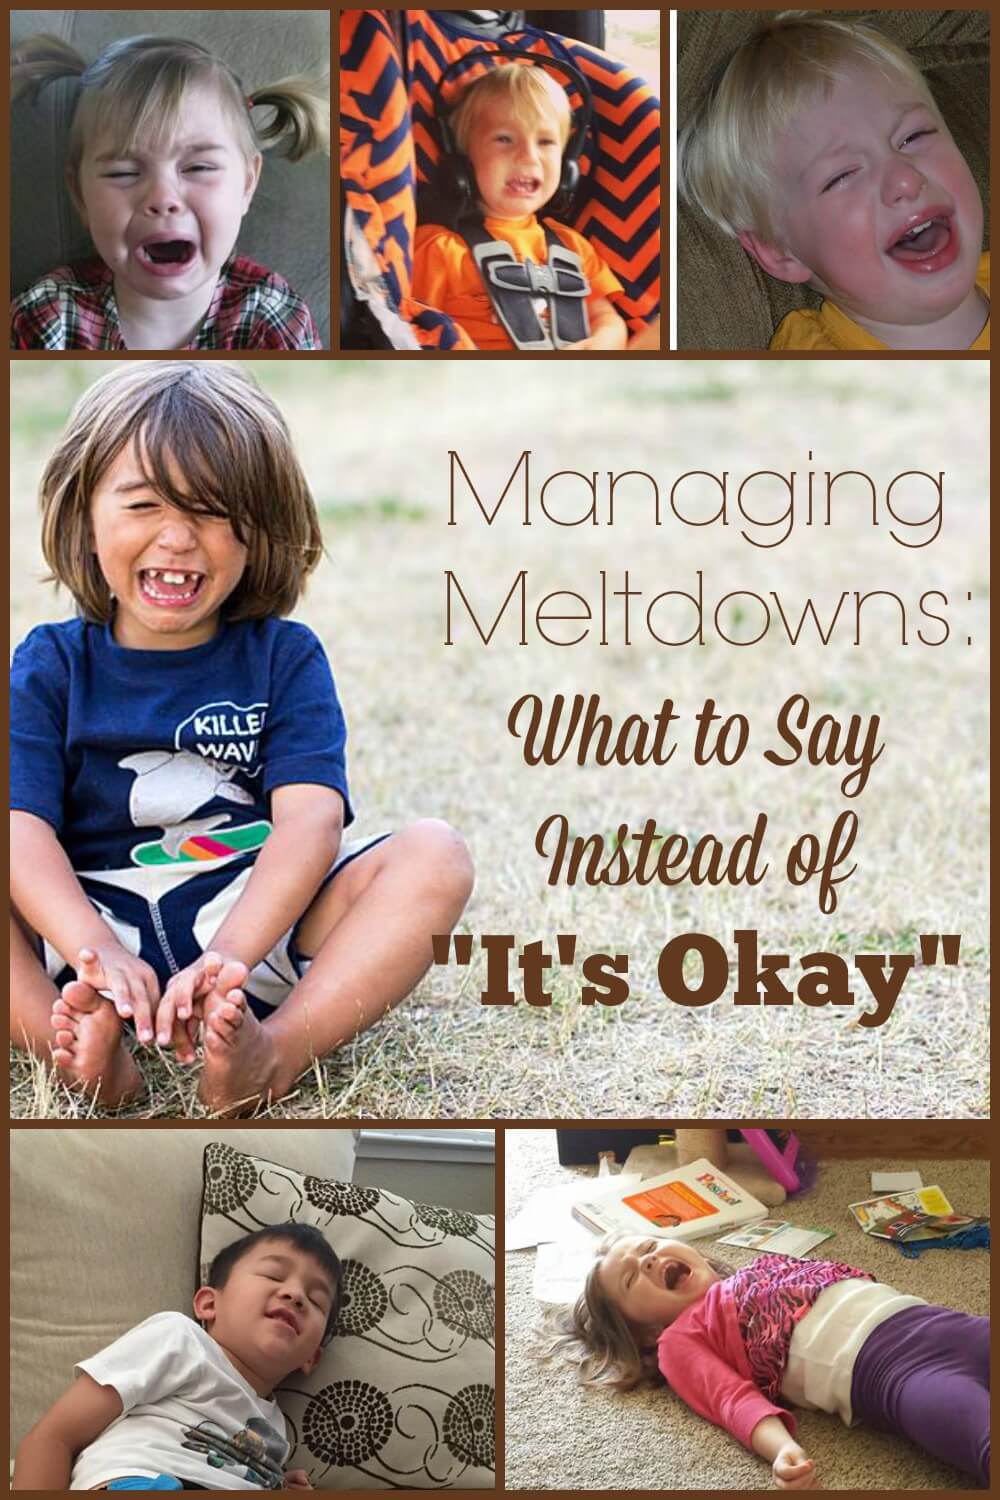 All kids have meltdowns. Here are 6 words that can help your kids get back in control and move past their meltdown.